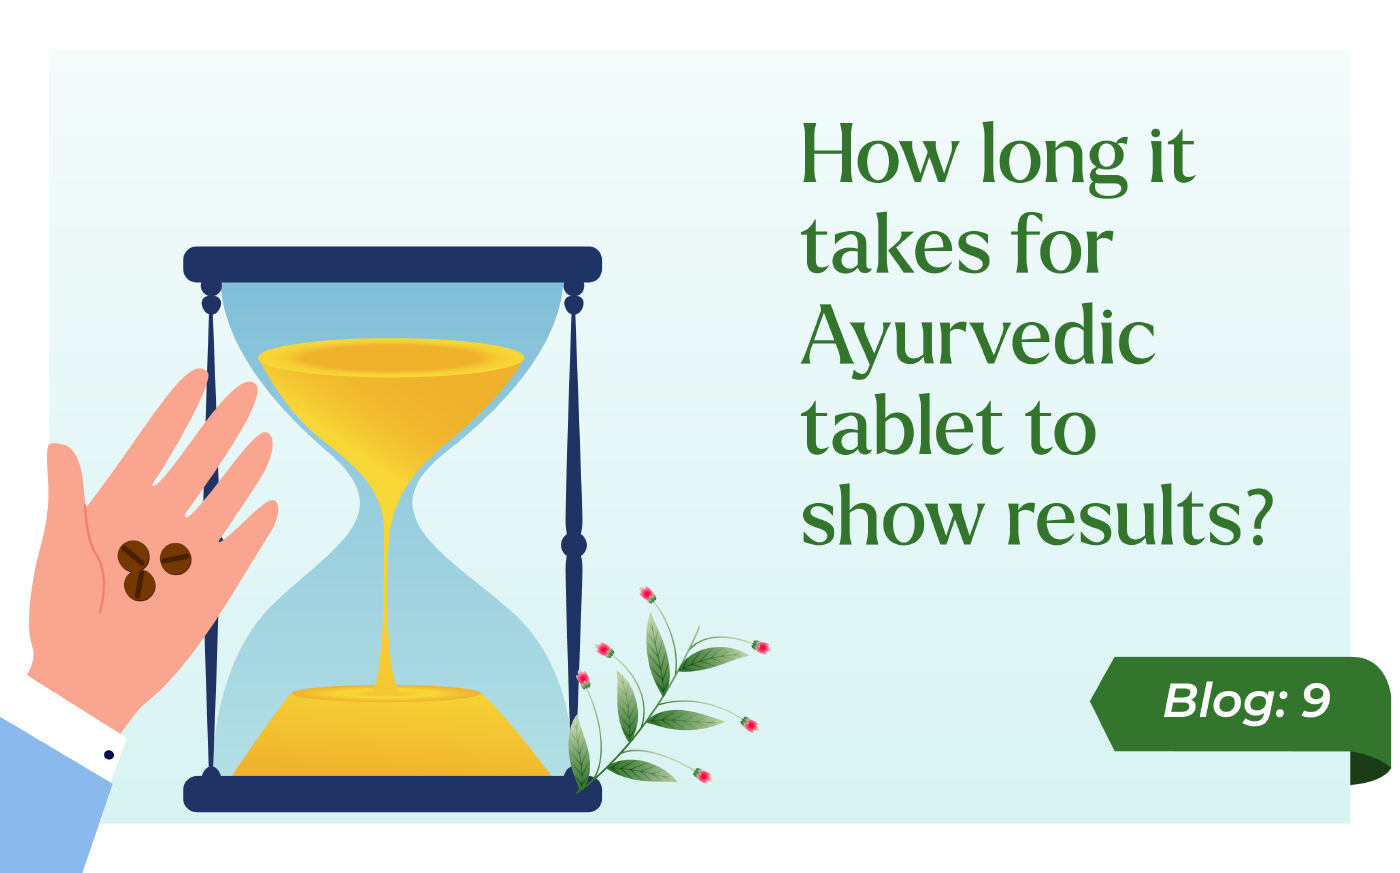 How long it takes for Ayurvedic tablets to show results blog